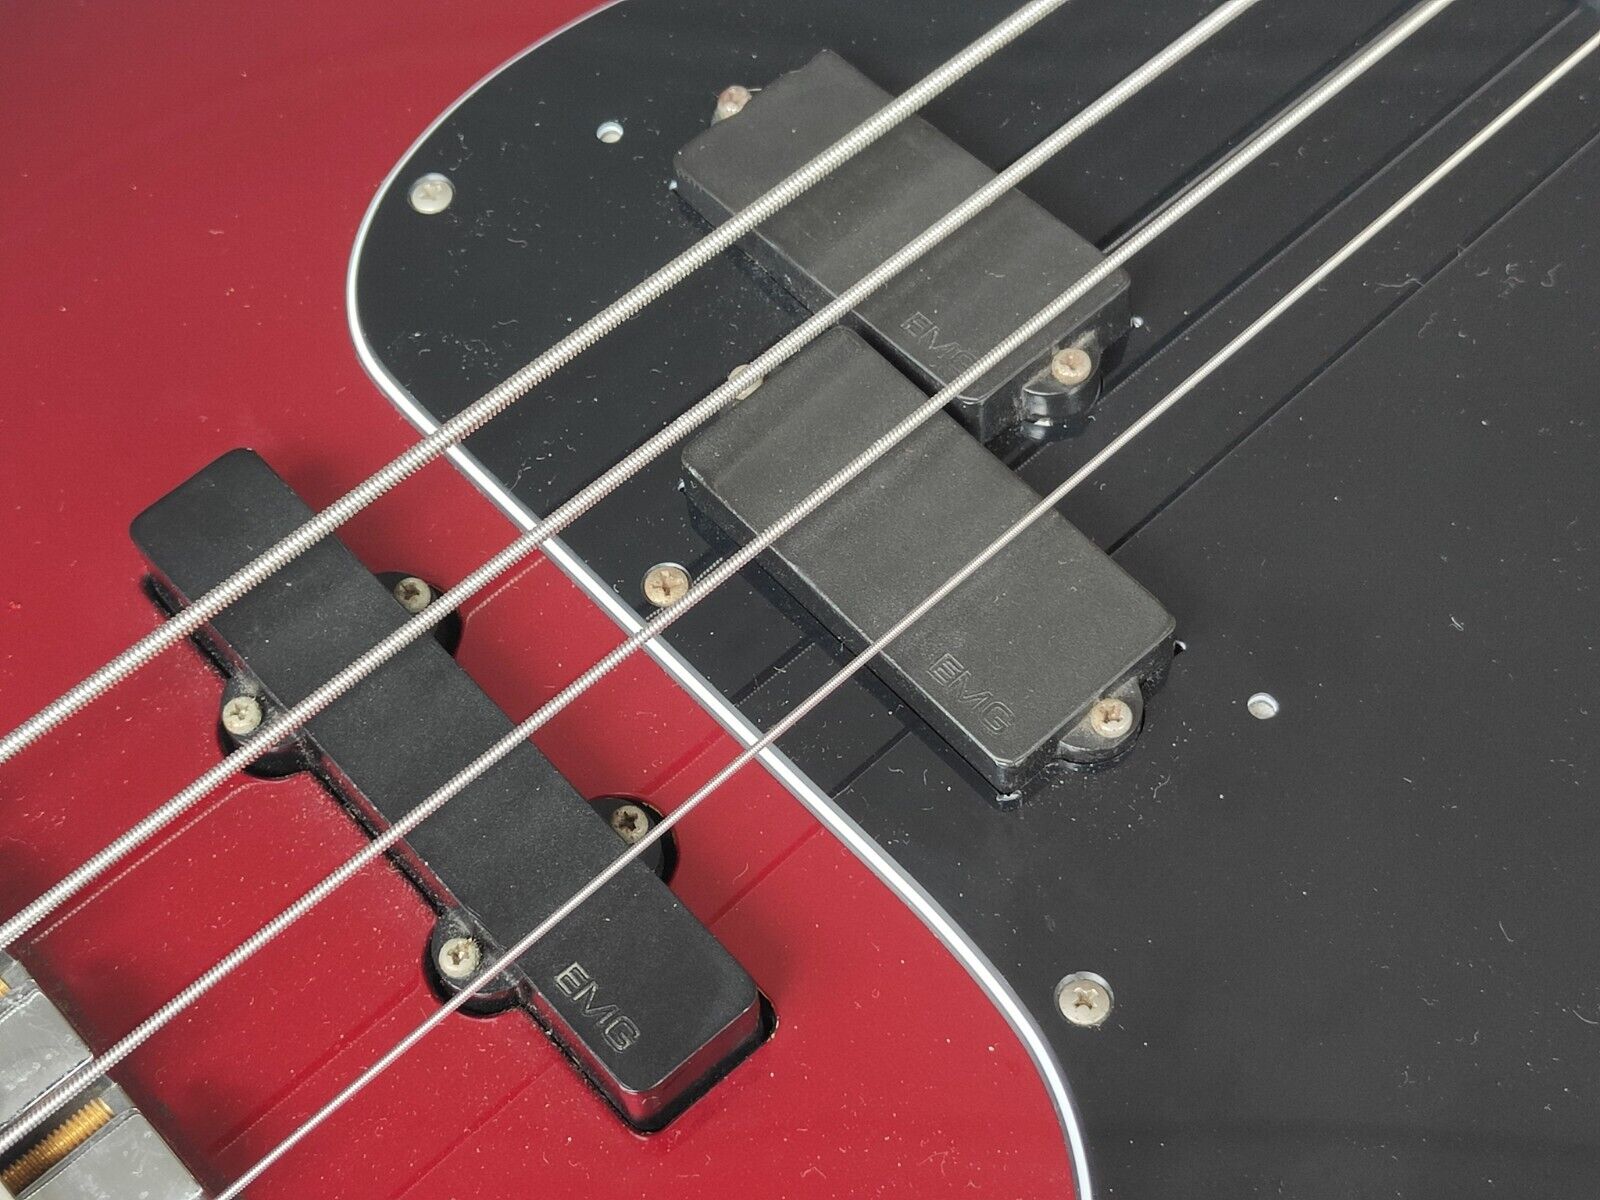 1988 Schecter Japan Precision Bass w/EMG's (Candy Apple Red)